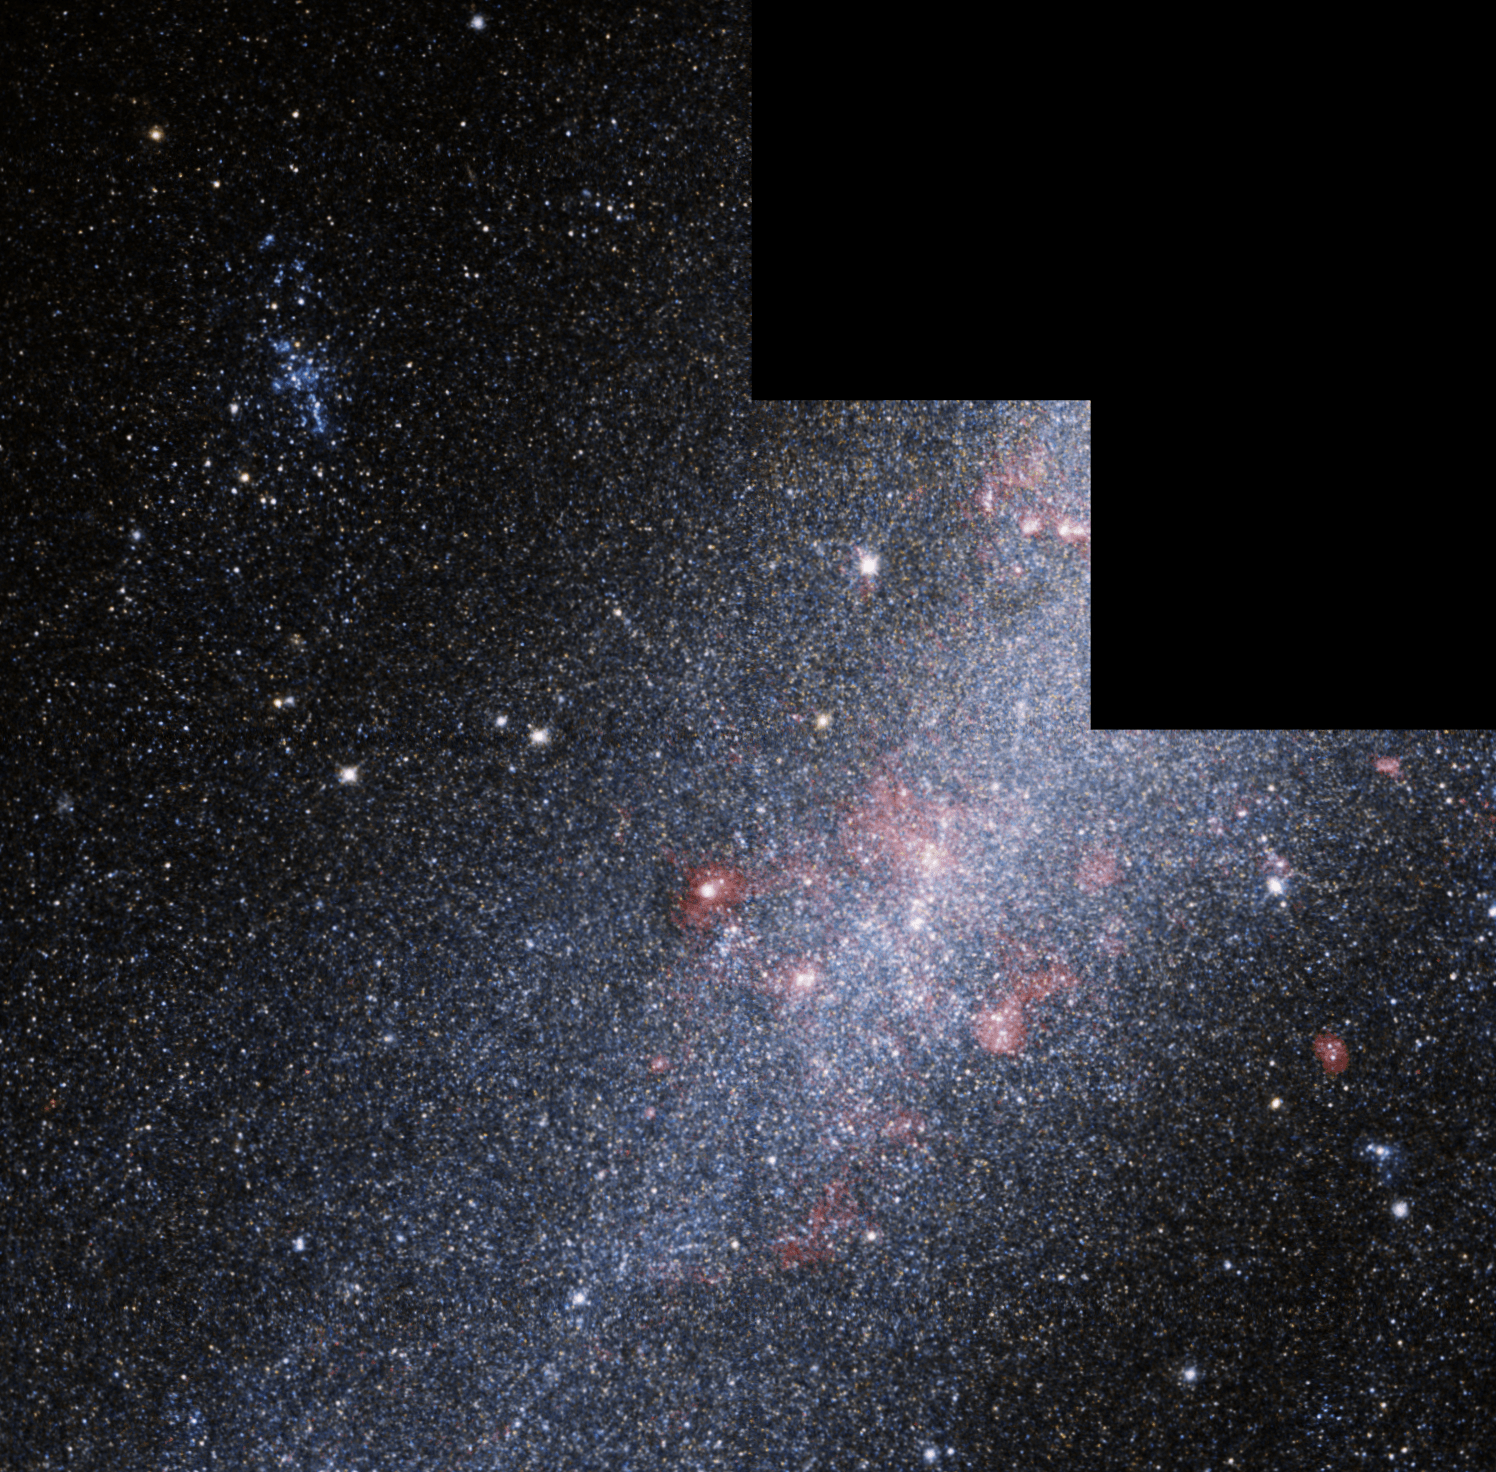 Large grouping of bright white, blue and red stars. Lightly colored blue dust surrounds the stars.